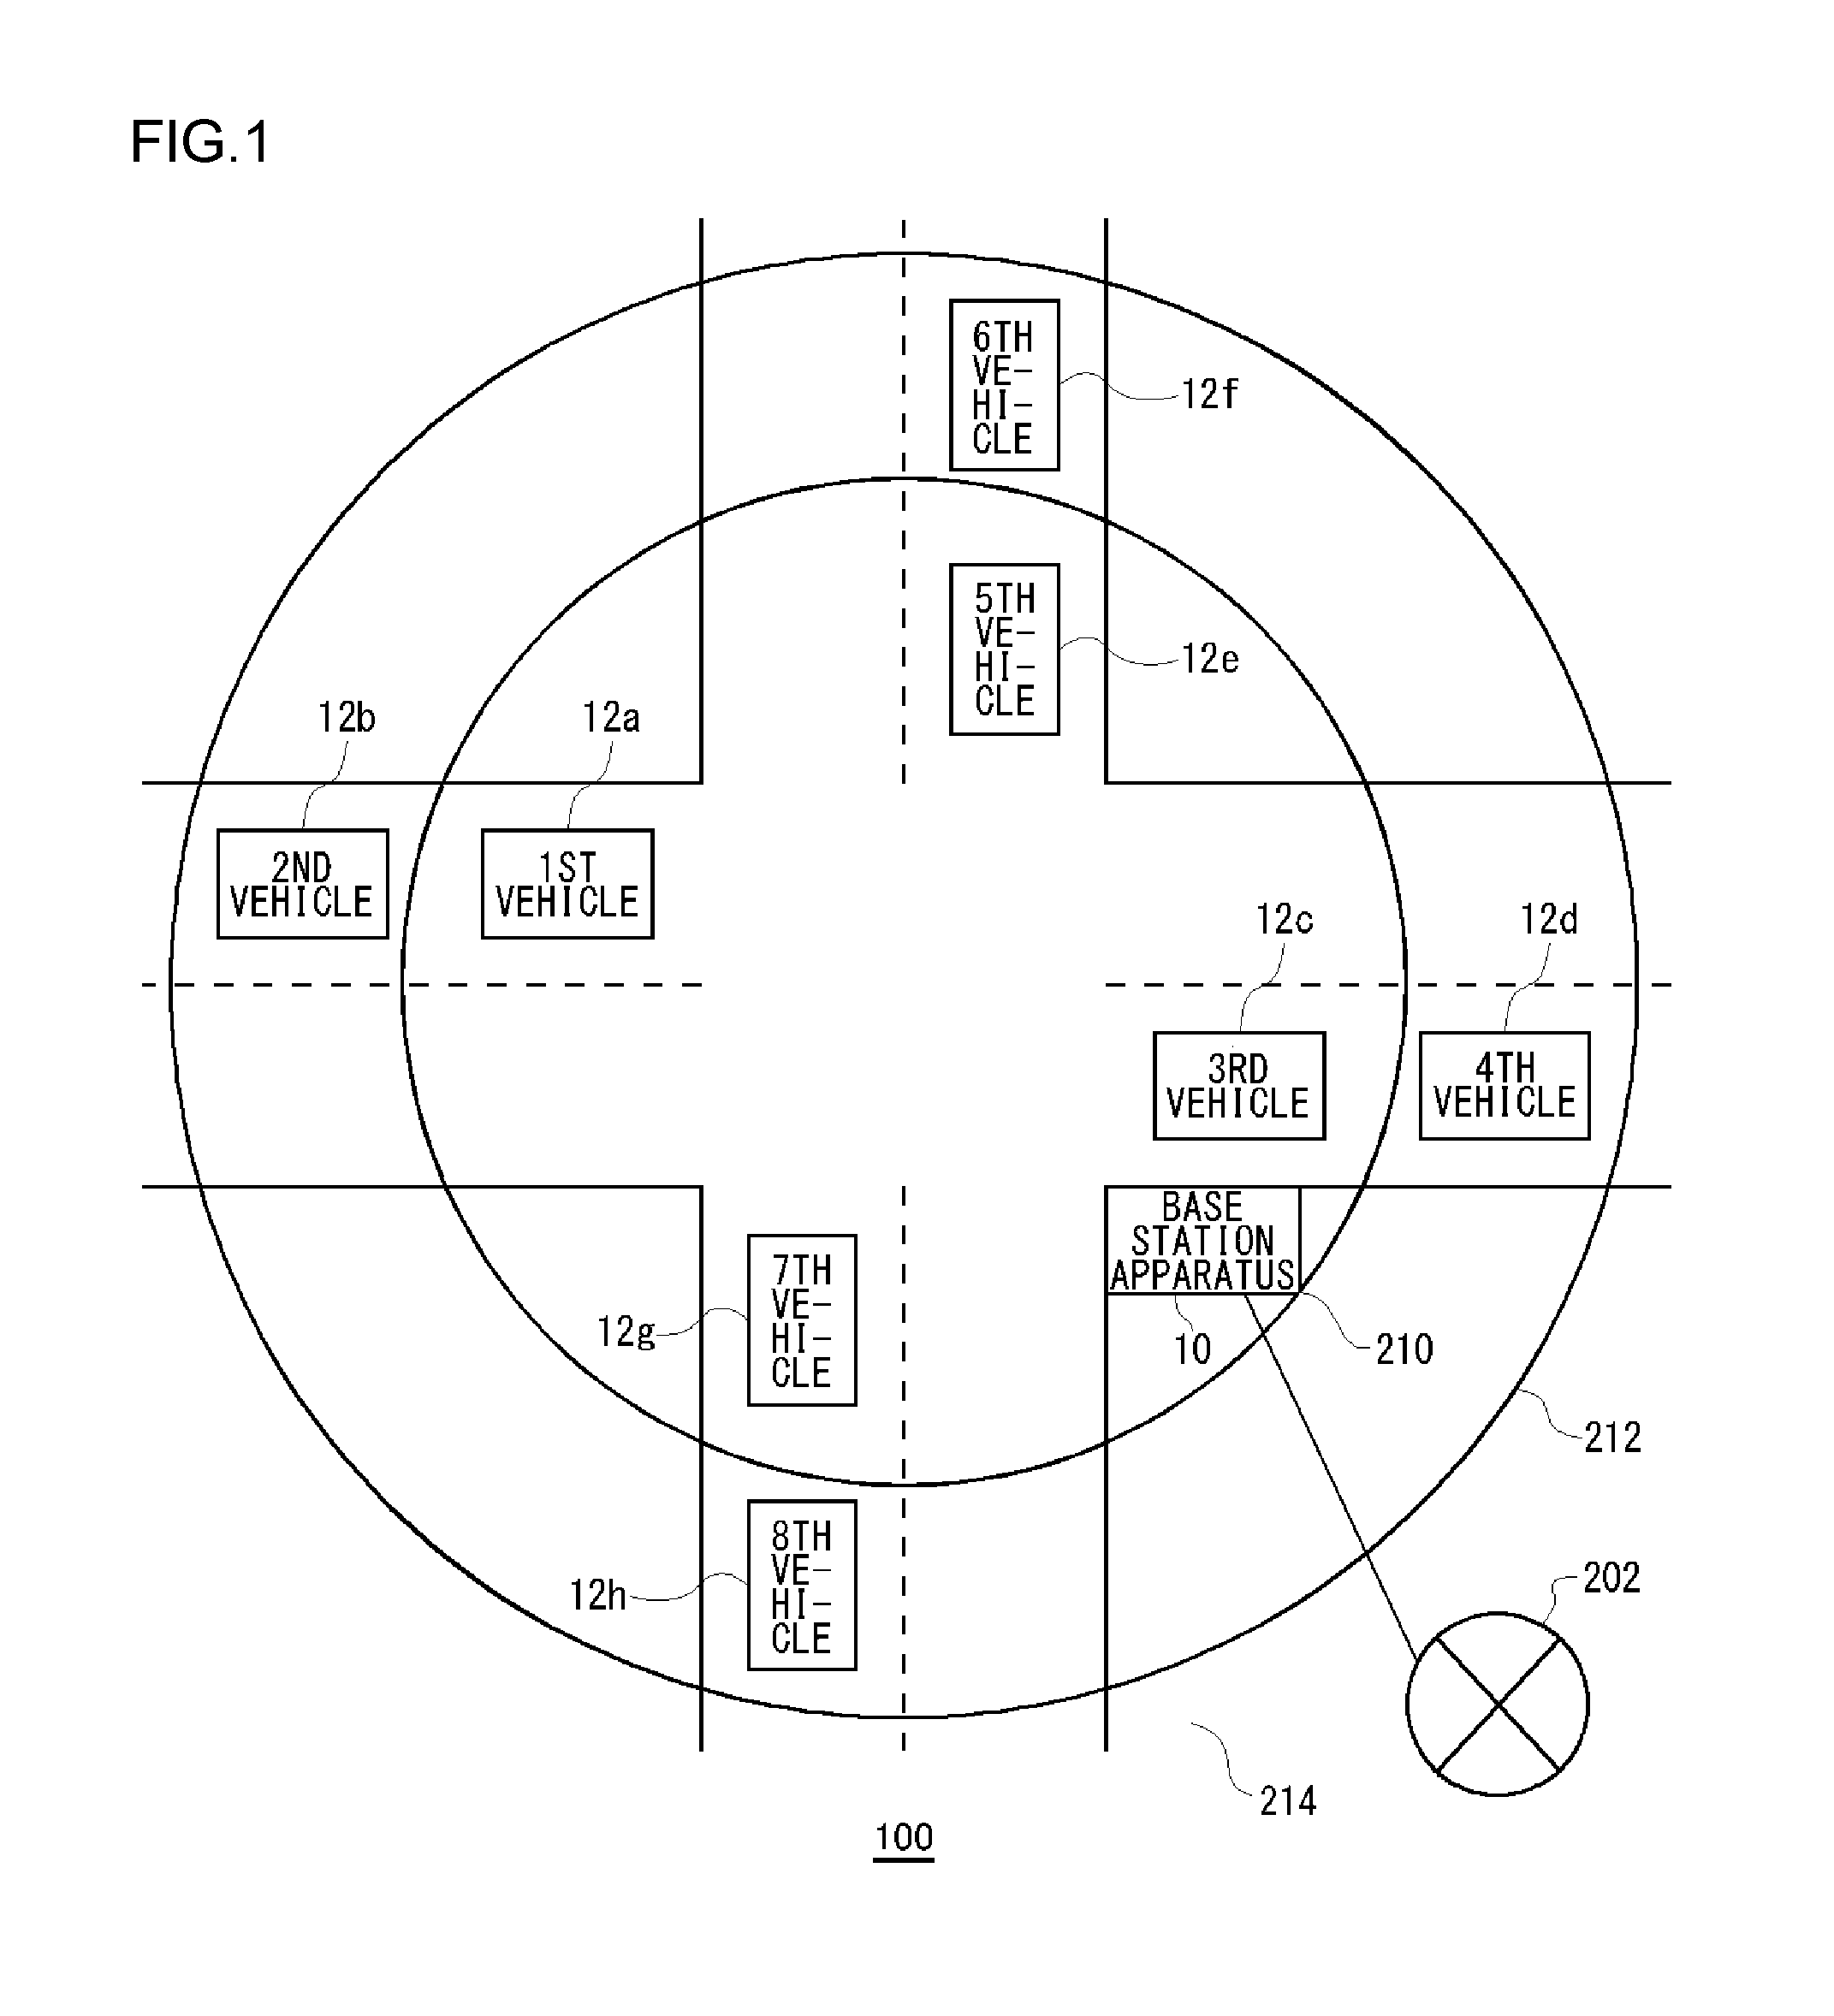 Terminal apparatus mounted on a vehicle to perform vehicle-to-vehicle communication